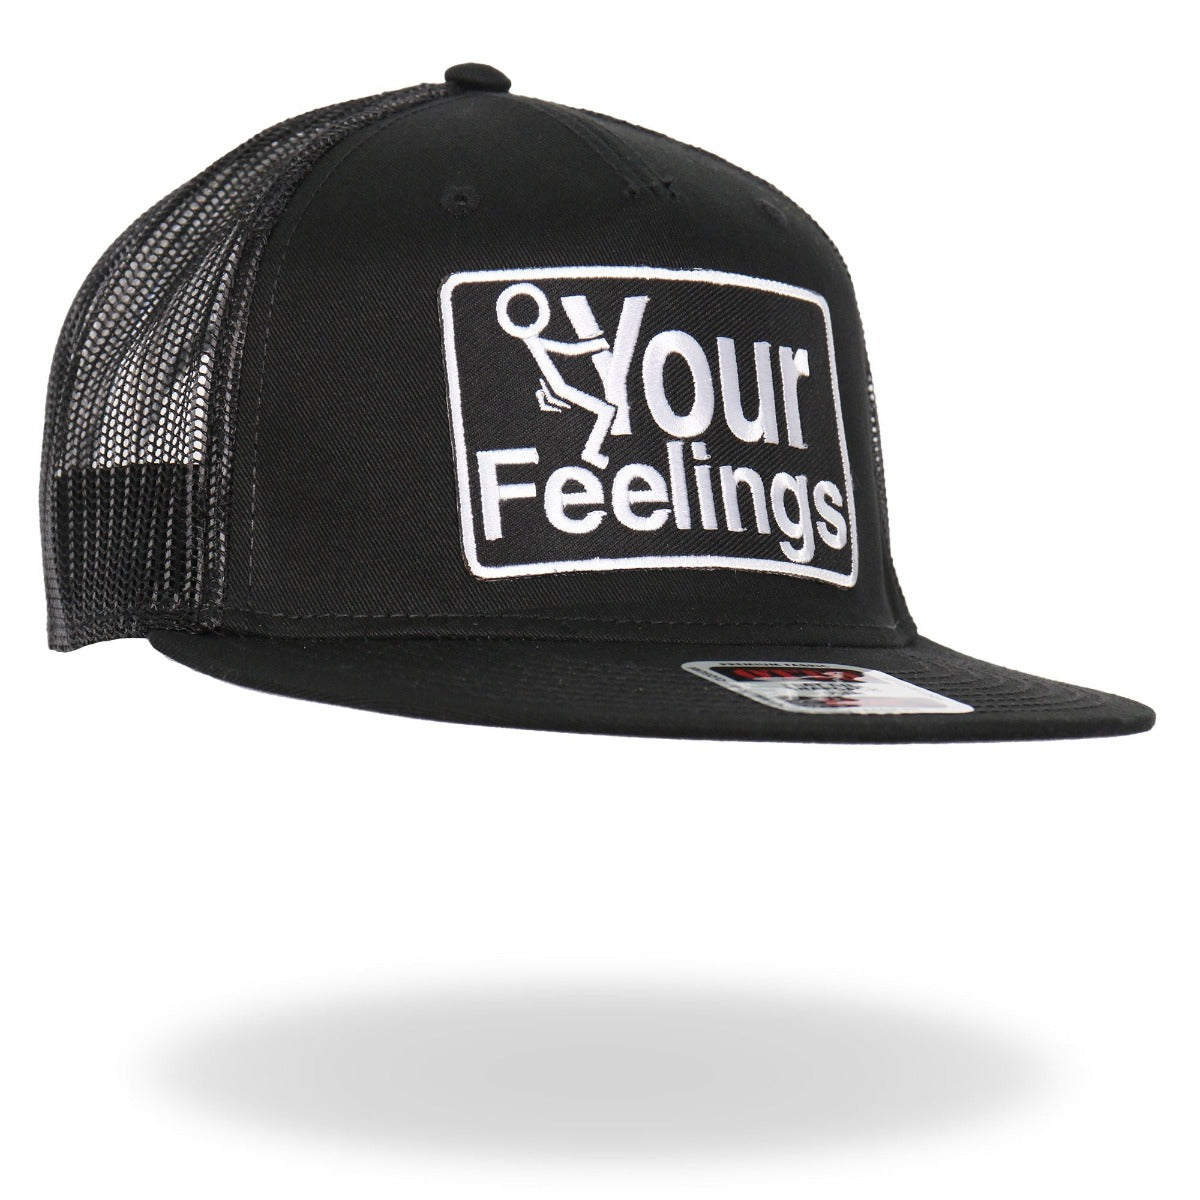 A Hot Leathers F Your Feelings Snapback Hat with a patch featuring the words your feelings on it.